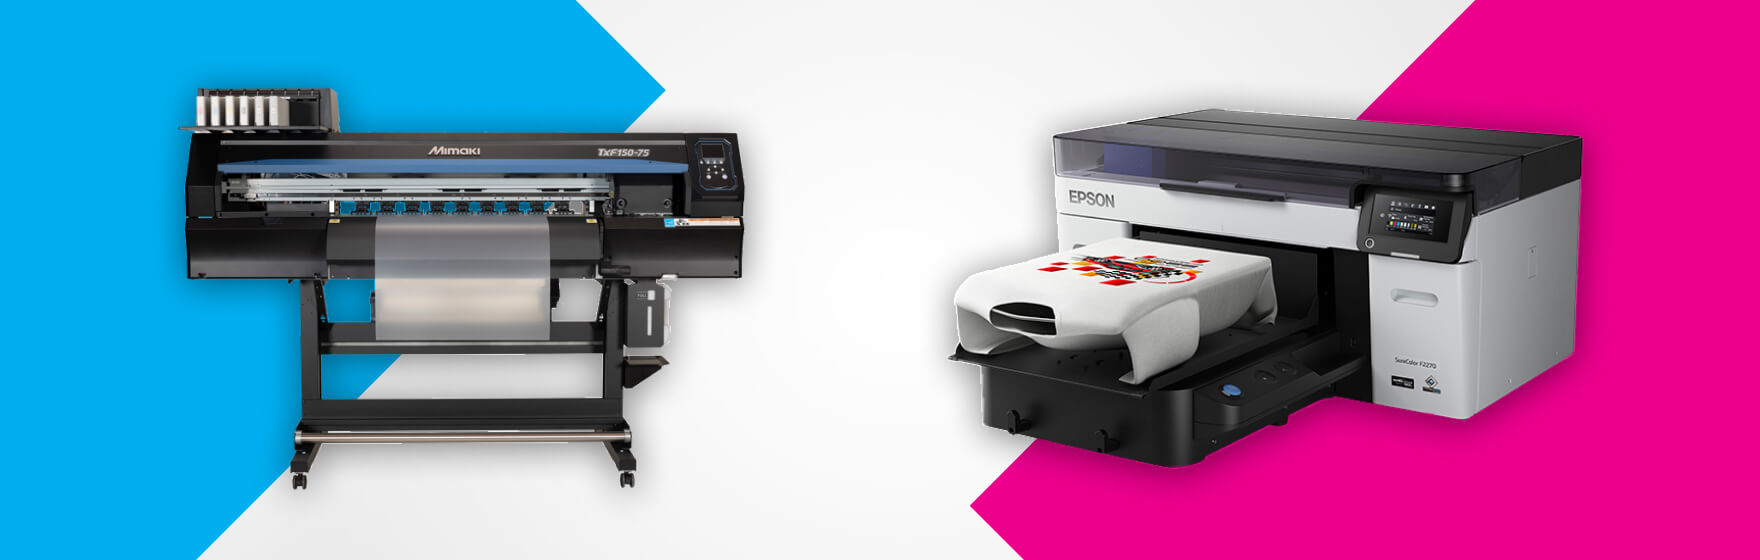 two t shirt printing machines overlaid over blue, pink and white graphic background